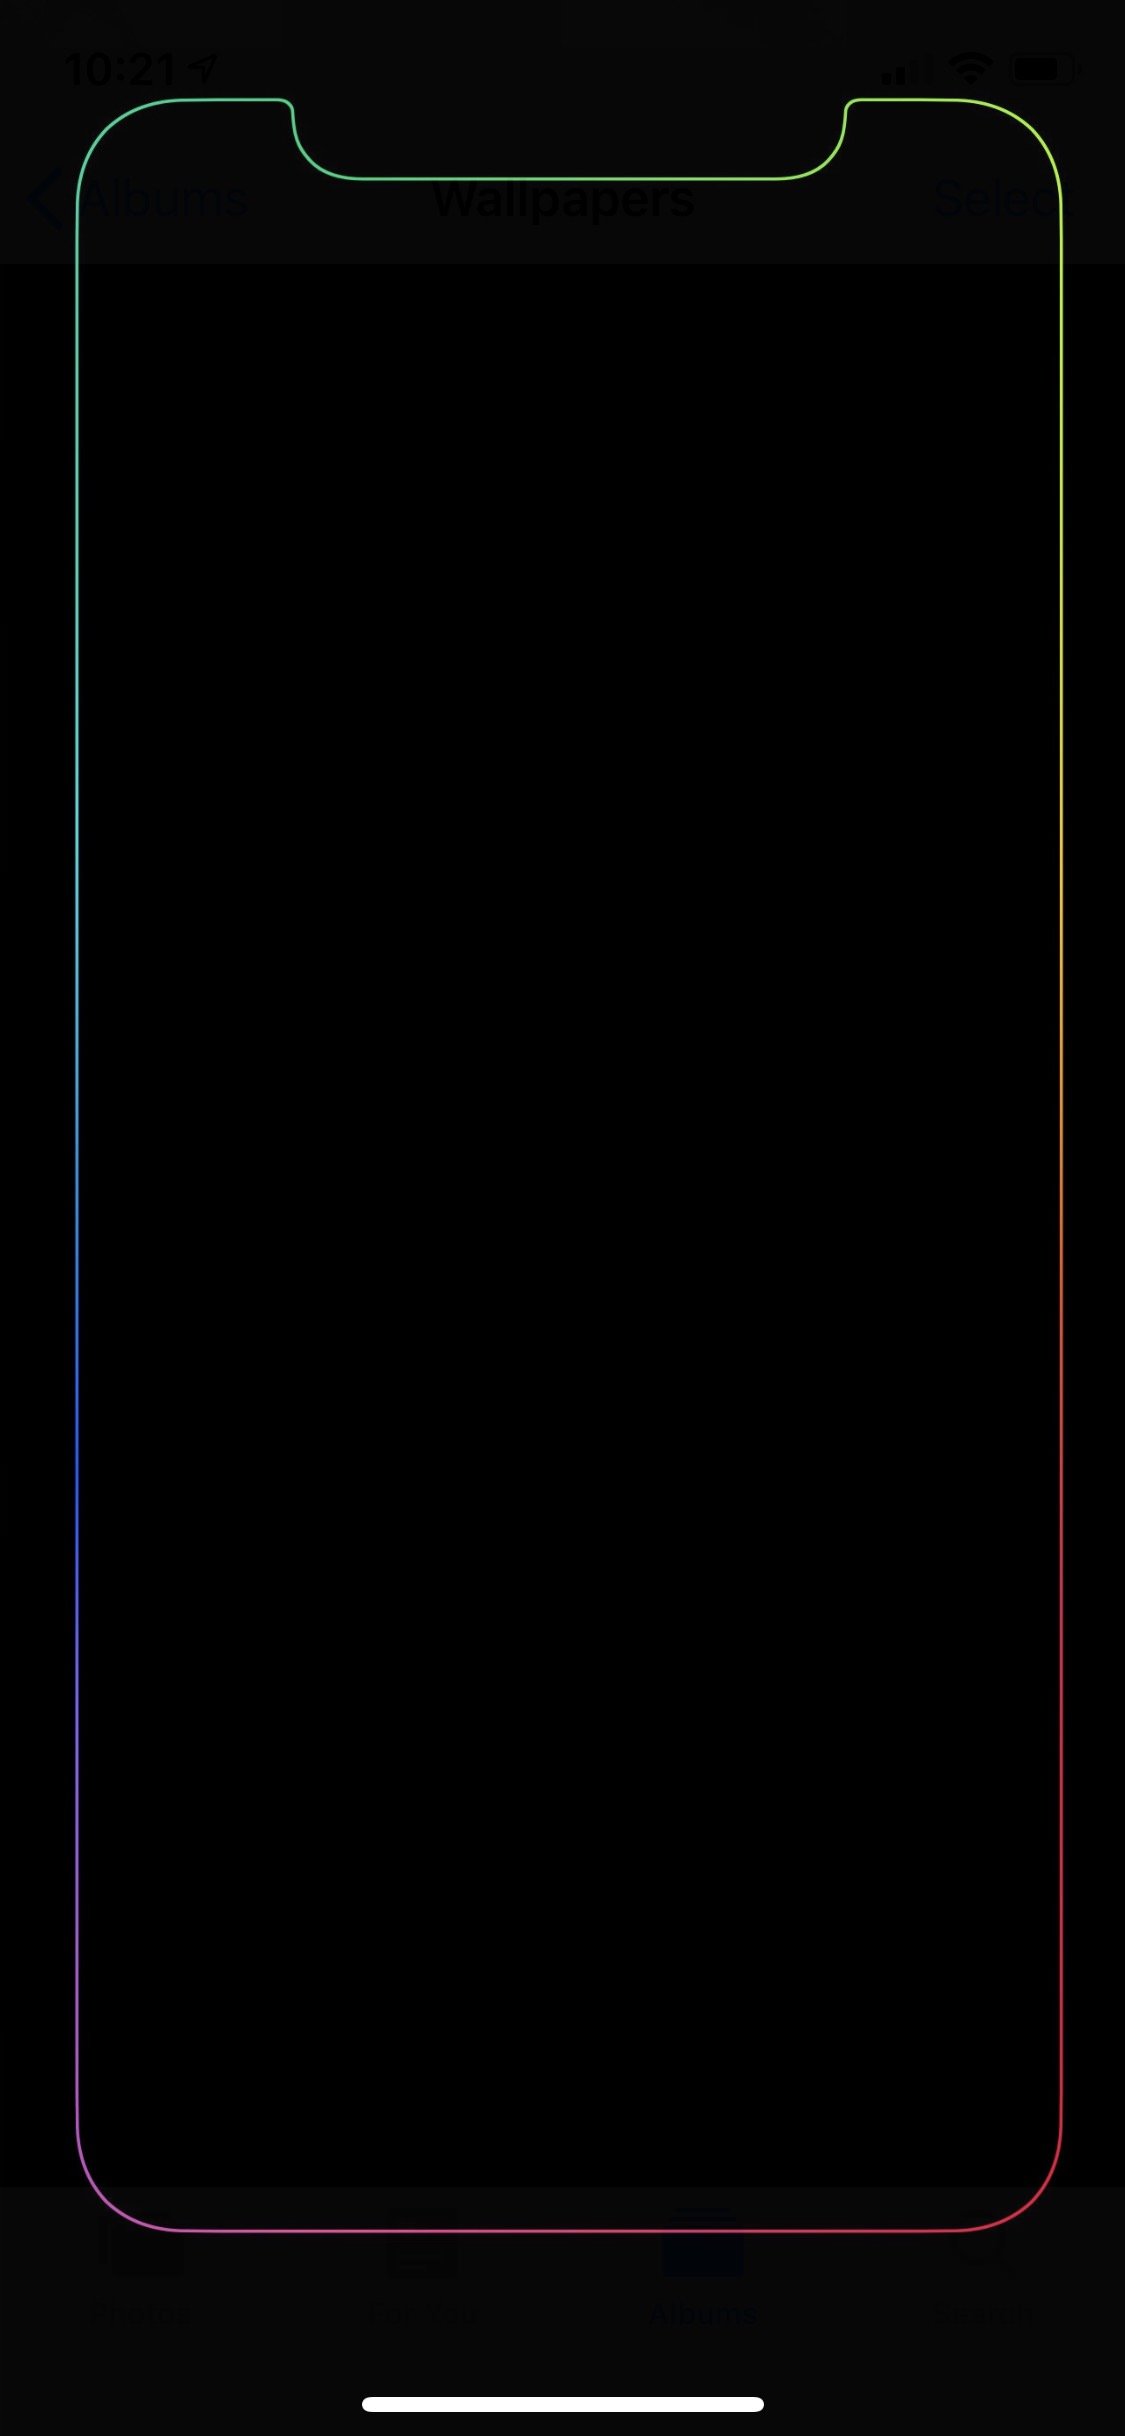 Does anyone have this rainbow outline wallpaper, but for the new iPad Pro?: apple